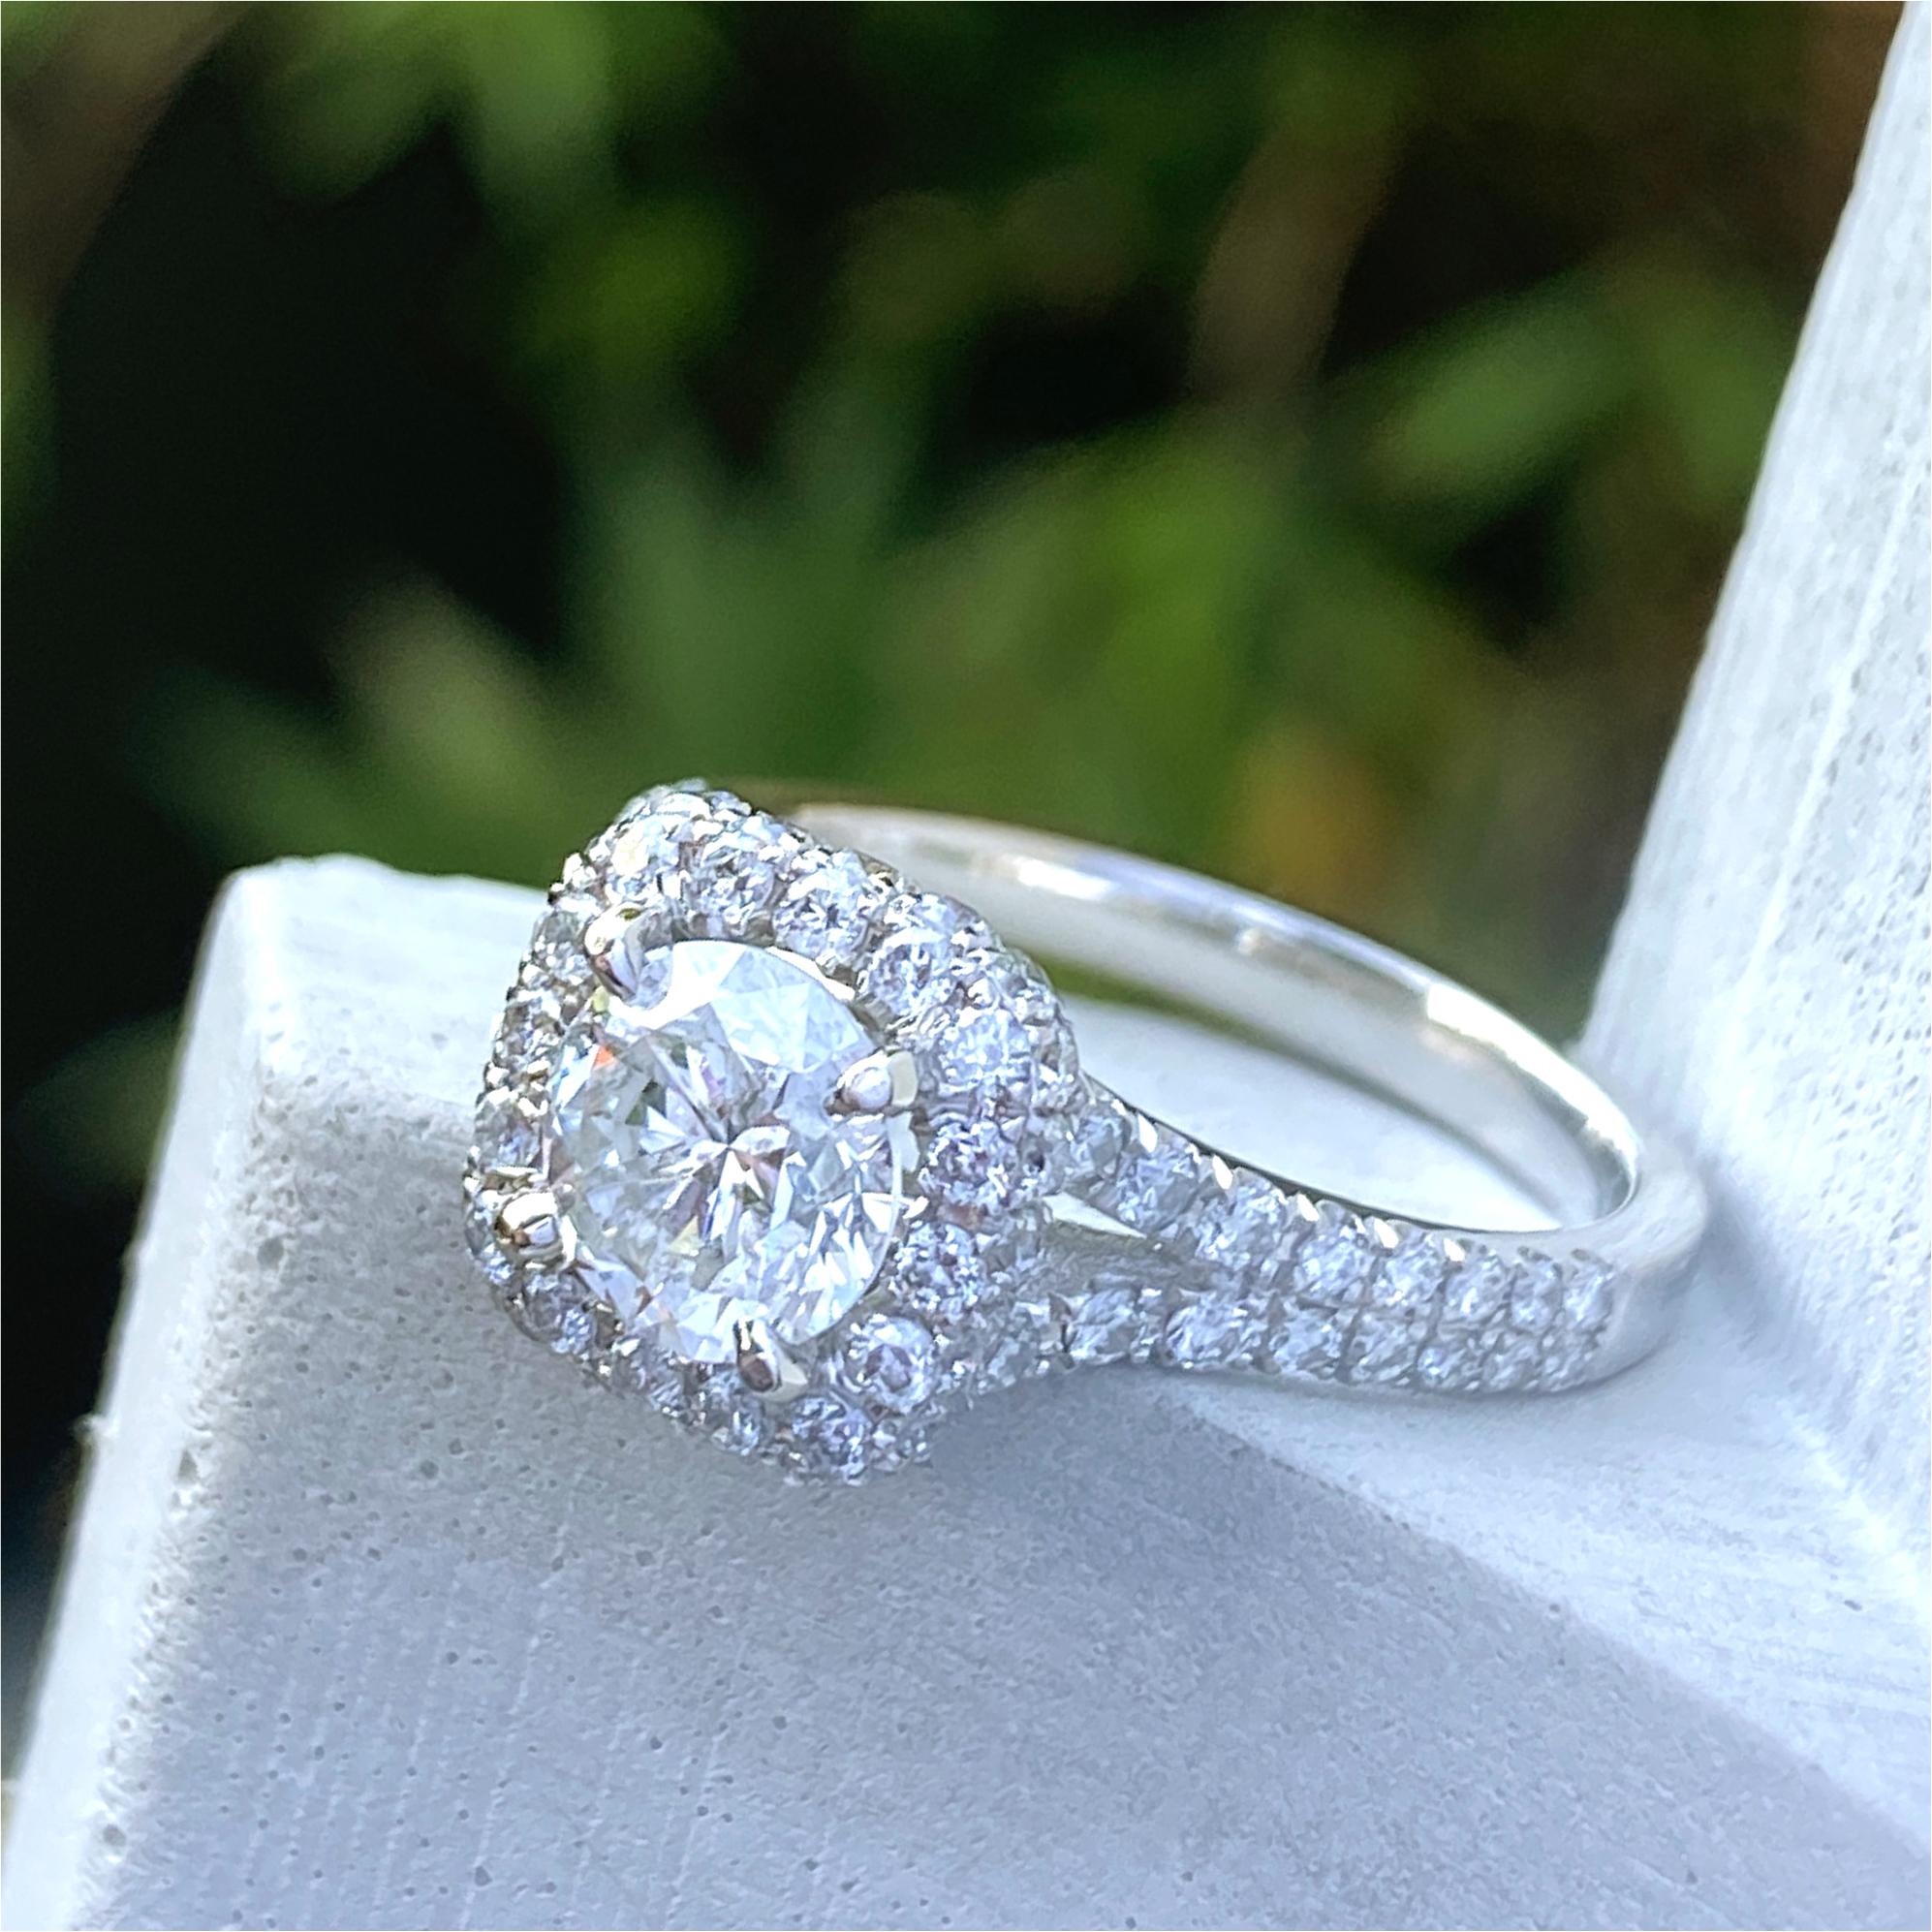 Certified 1.04 Carat Round Diamond in Square Halo Engagement Ring in Platinum For Sale 2